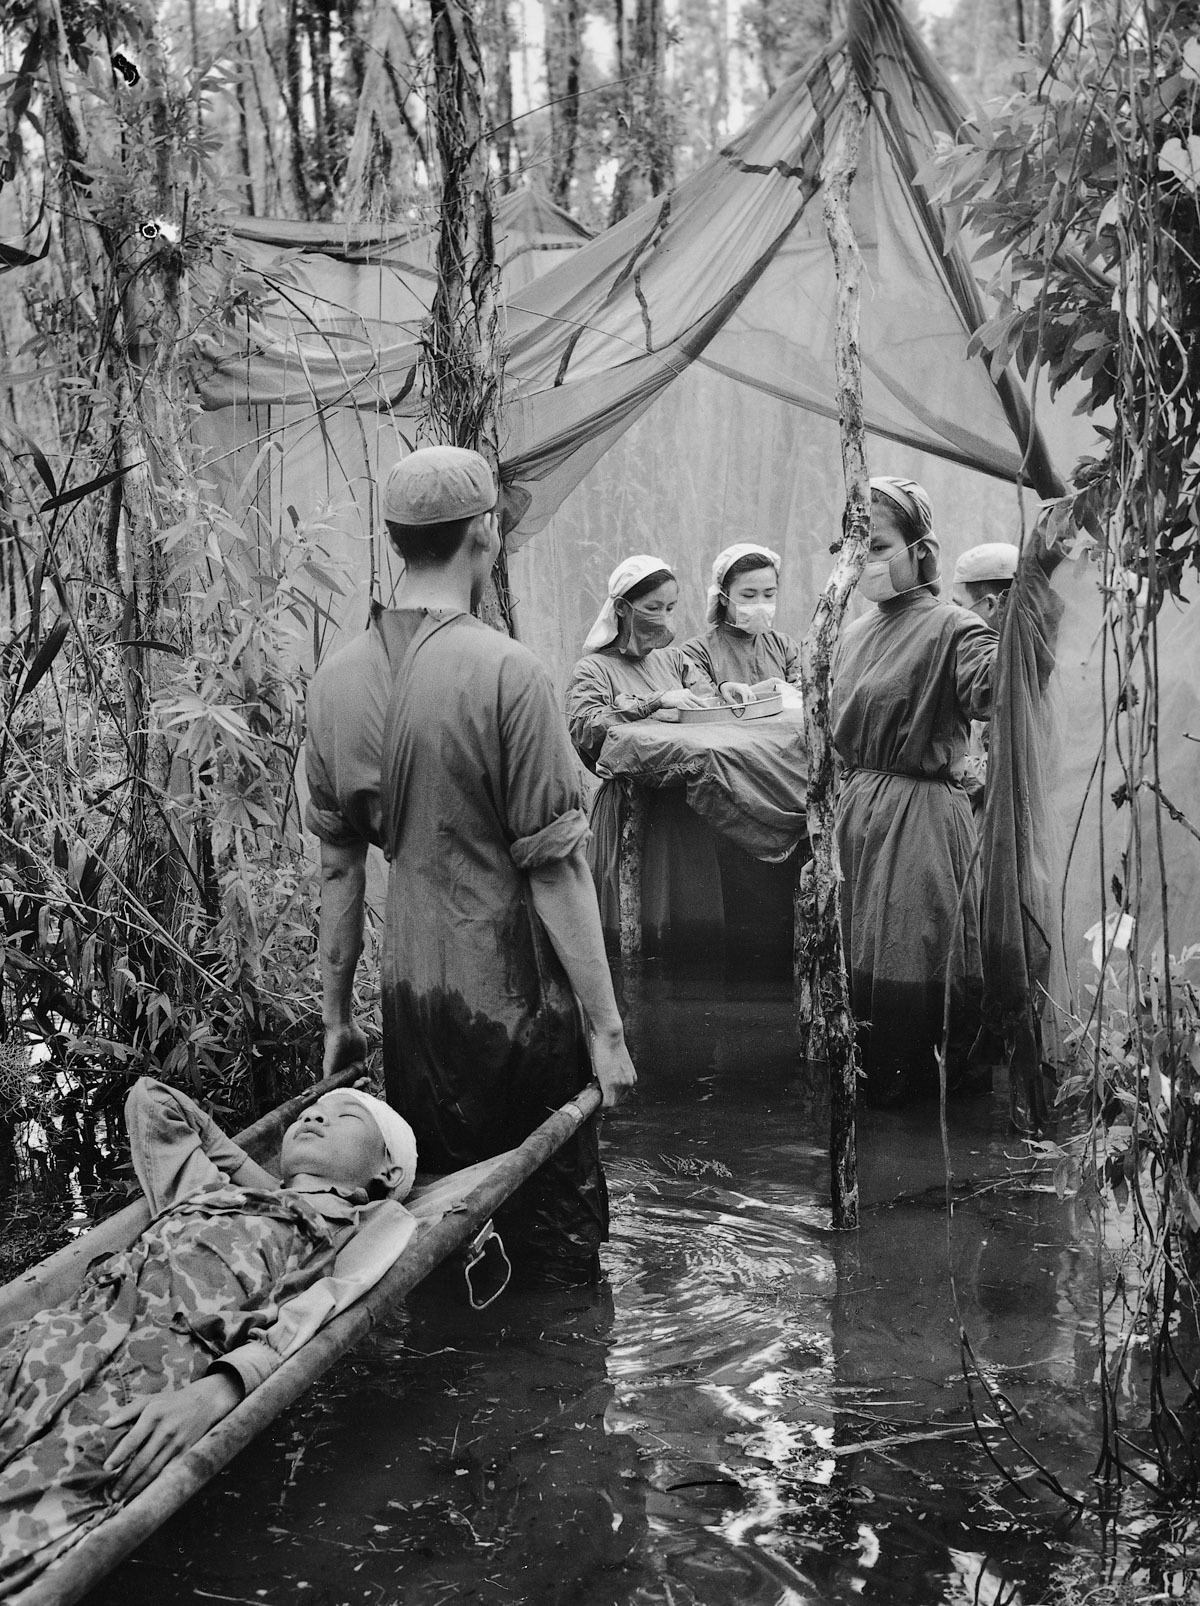 Sept. 15, 1970: Ethnic Cambodian guerrilla Danh Son Huol is treated for wounds from an American bombing at an improvised operating room in a swamp on the Ca Mau Peninsula.